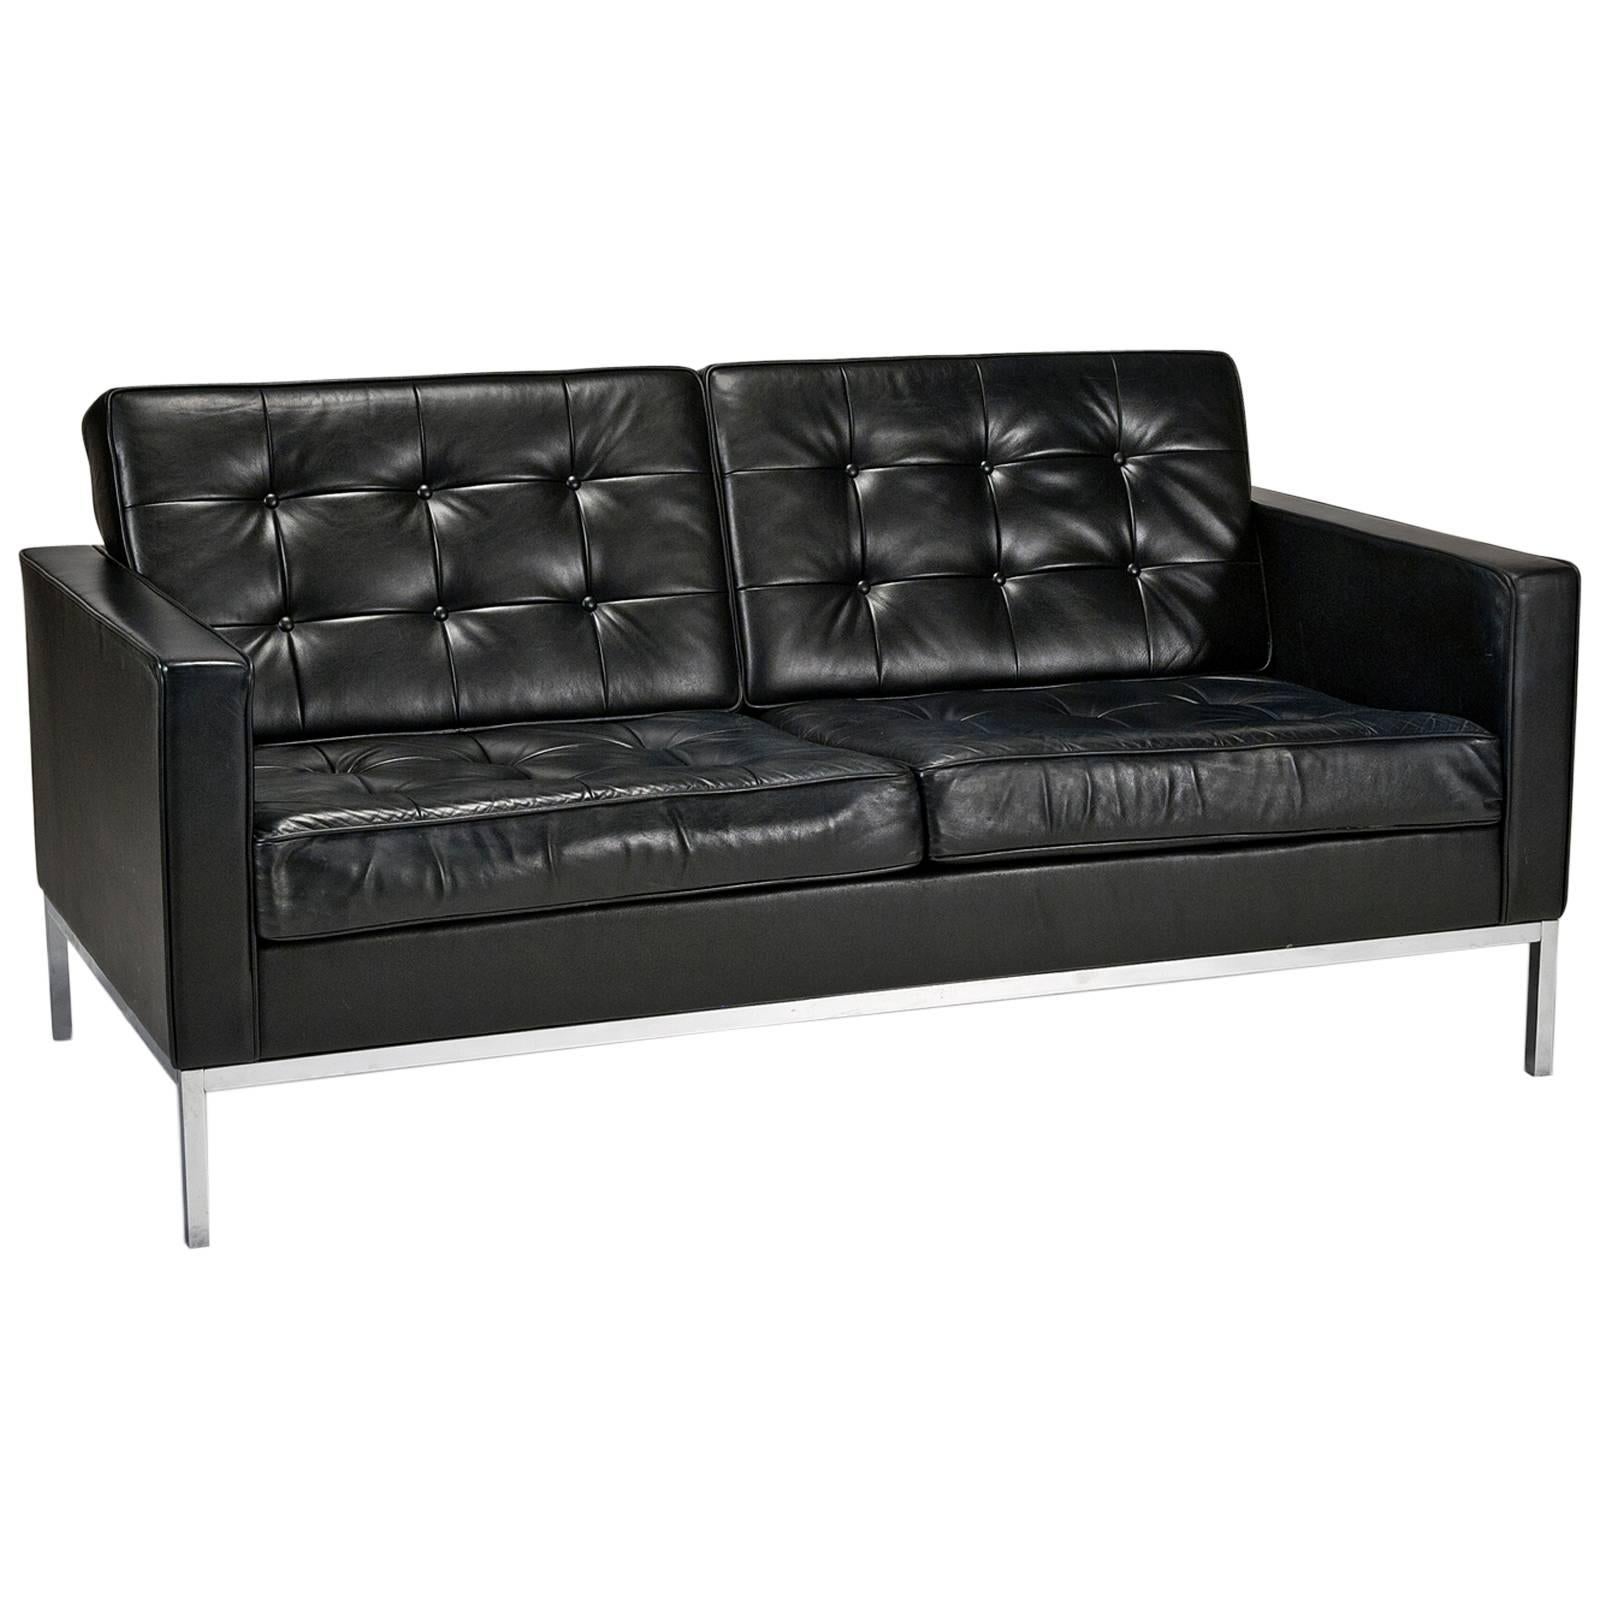 Florence Knoll Leather Settee Designed by Florence Knoll for Knoll Studio